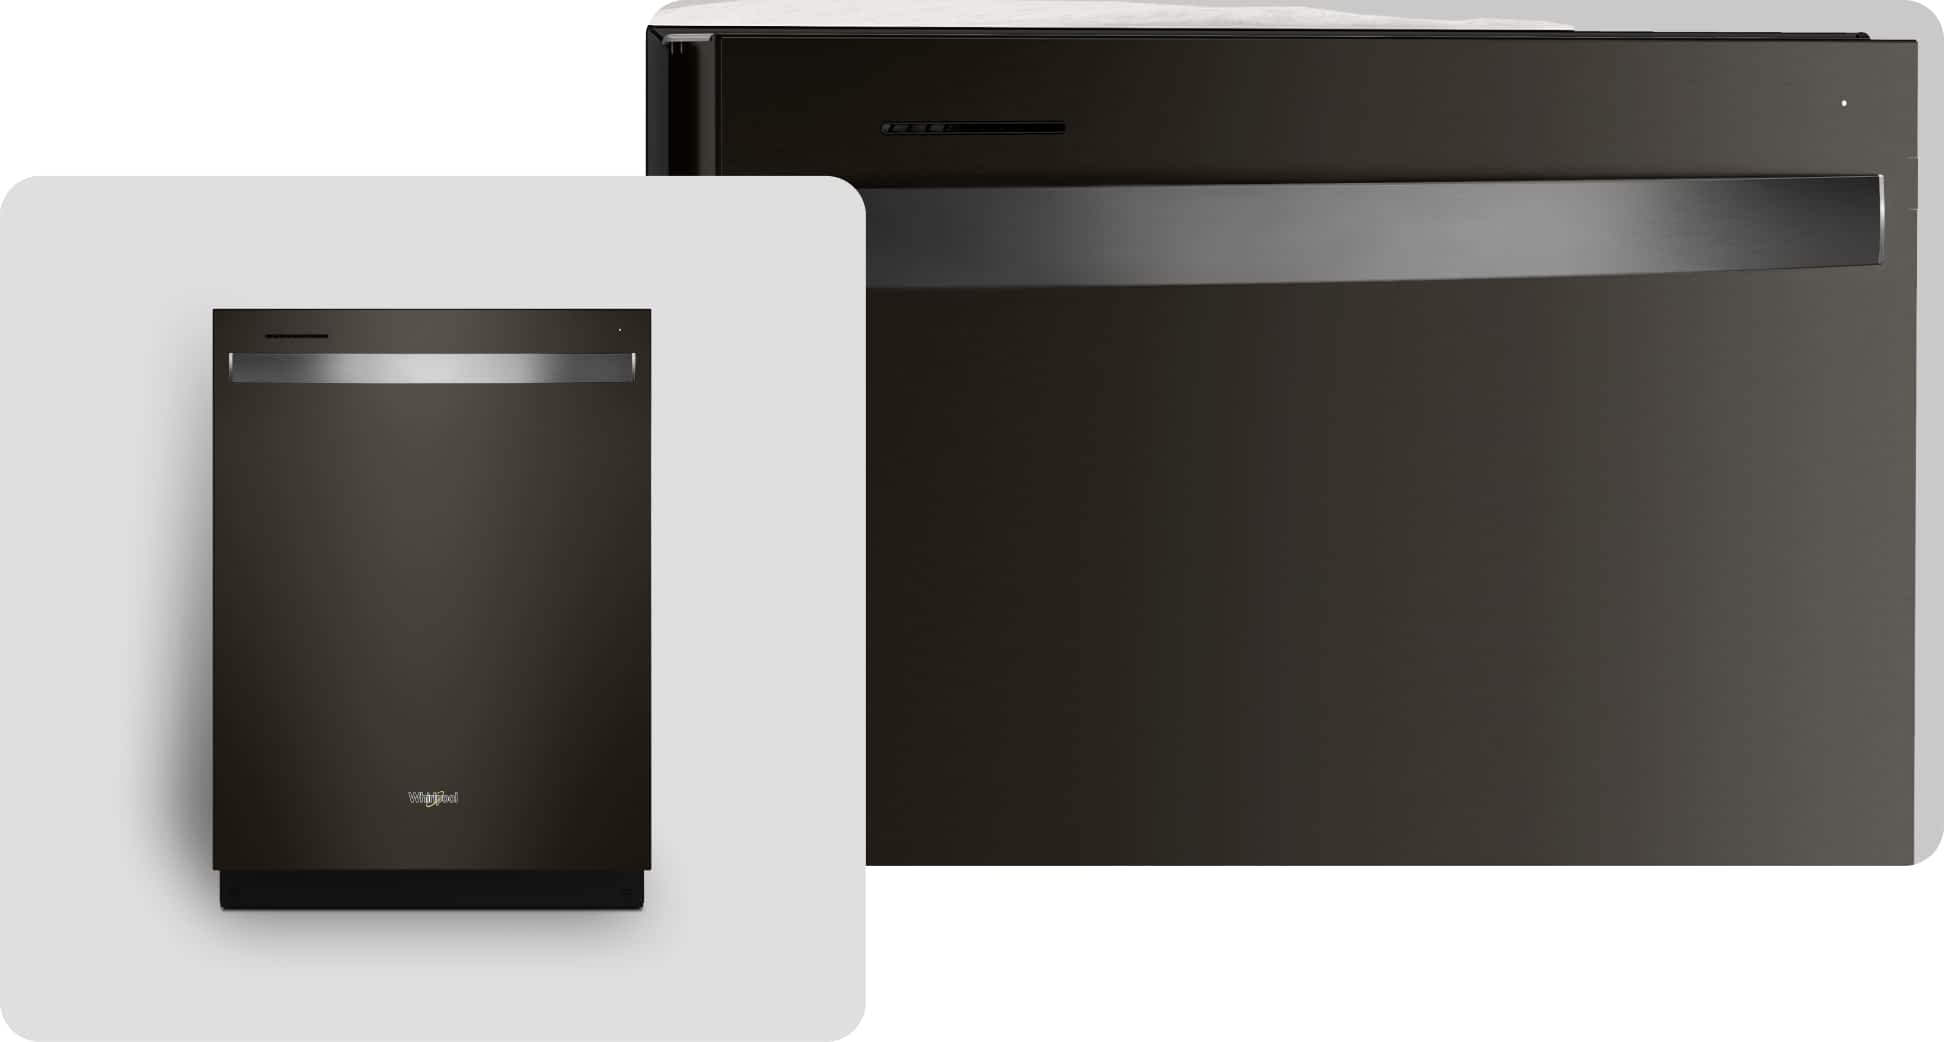 A Whirlpool® Dishwasher with a Fingerprint-Resistant Black Stainless Finish 